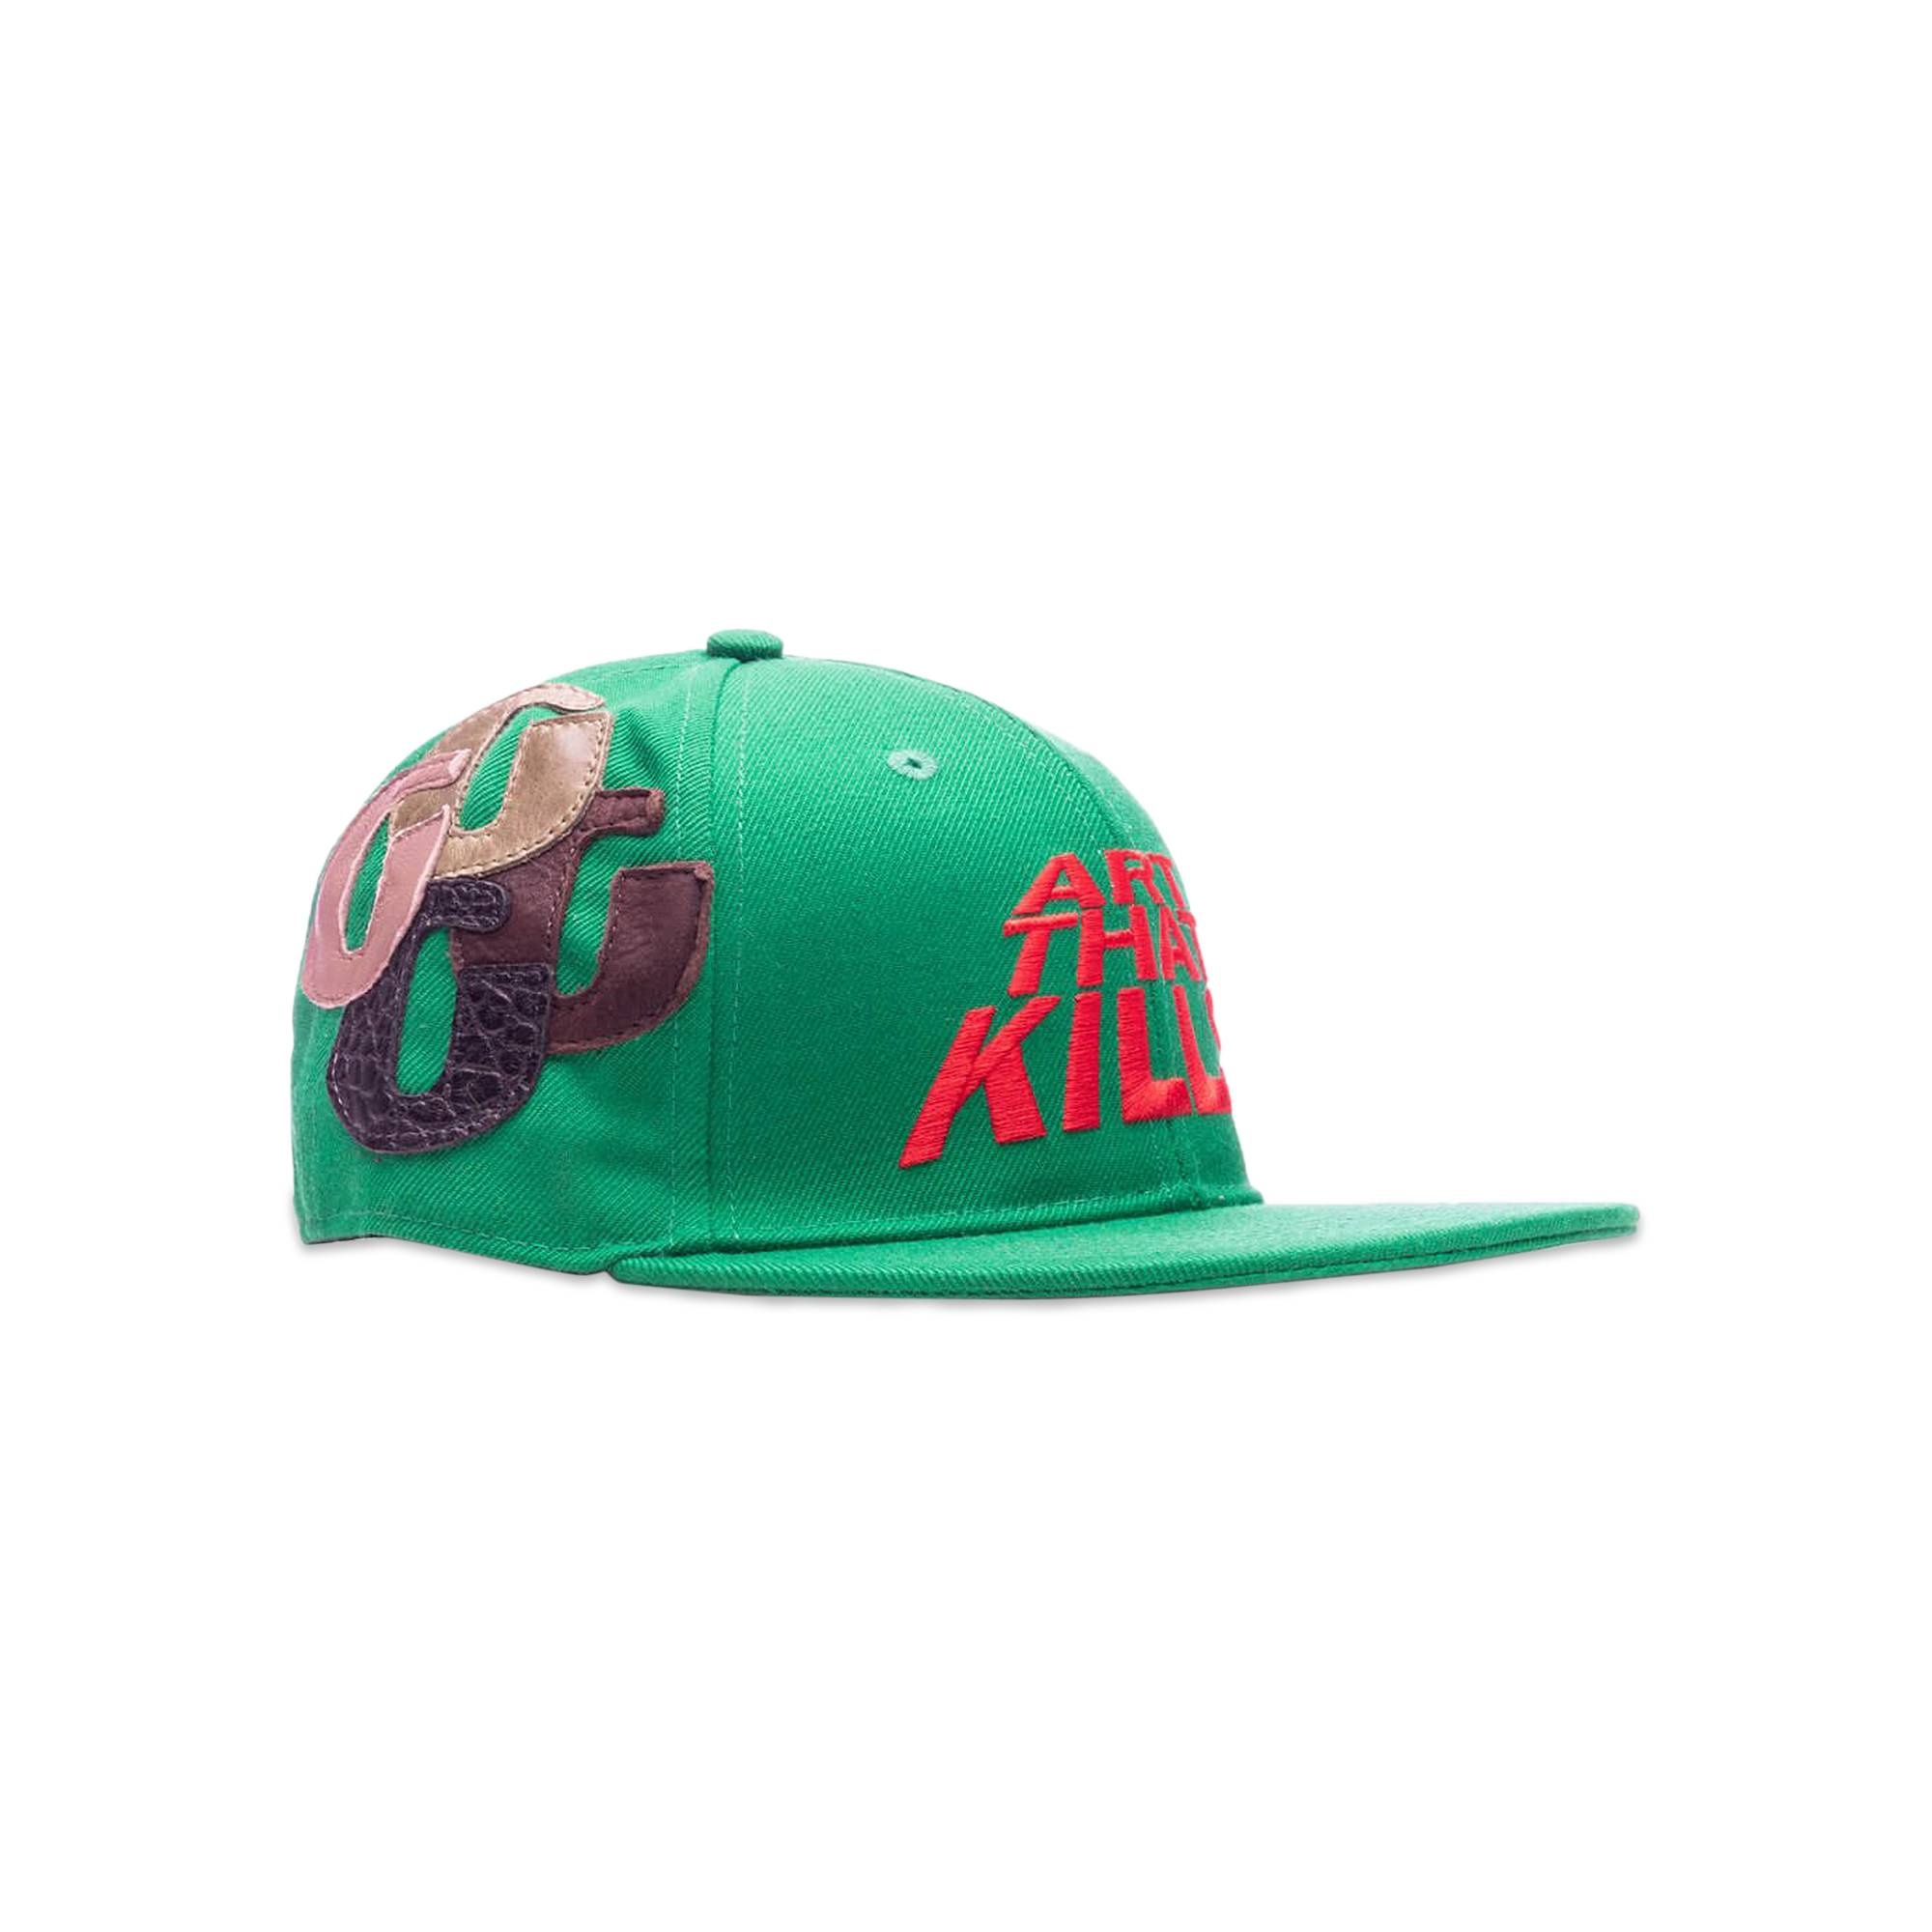 Gallery Dept. ATK G Patch Fitted Cap 'Green' - 3